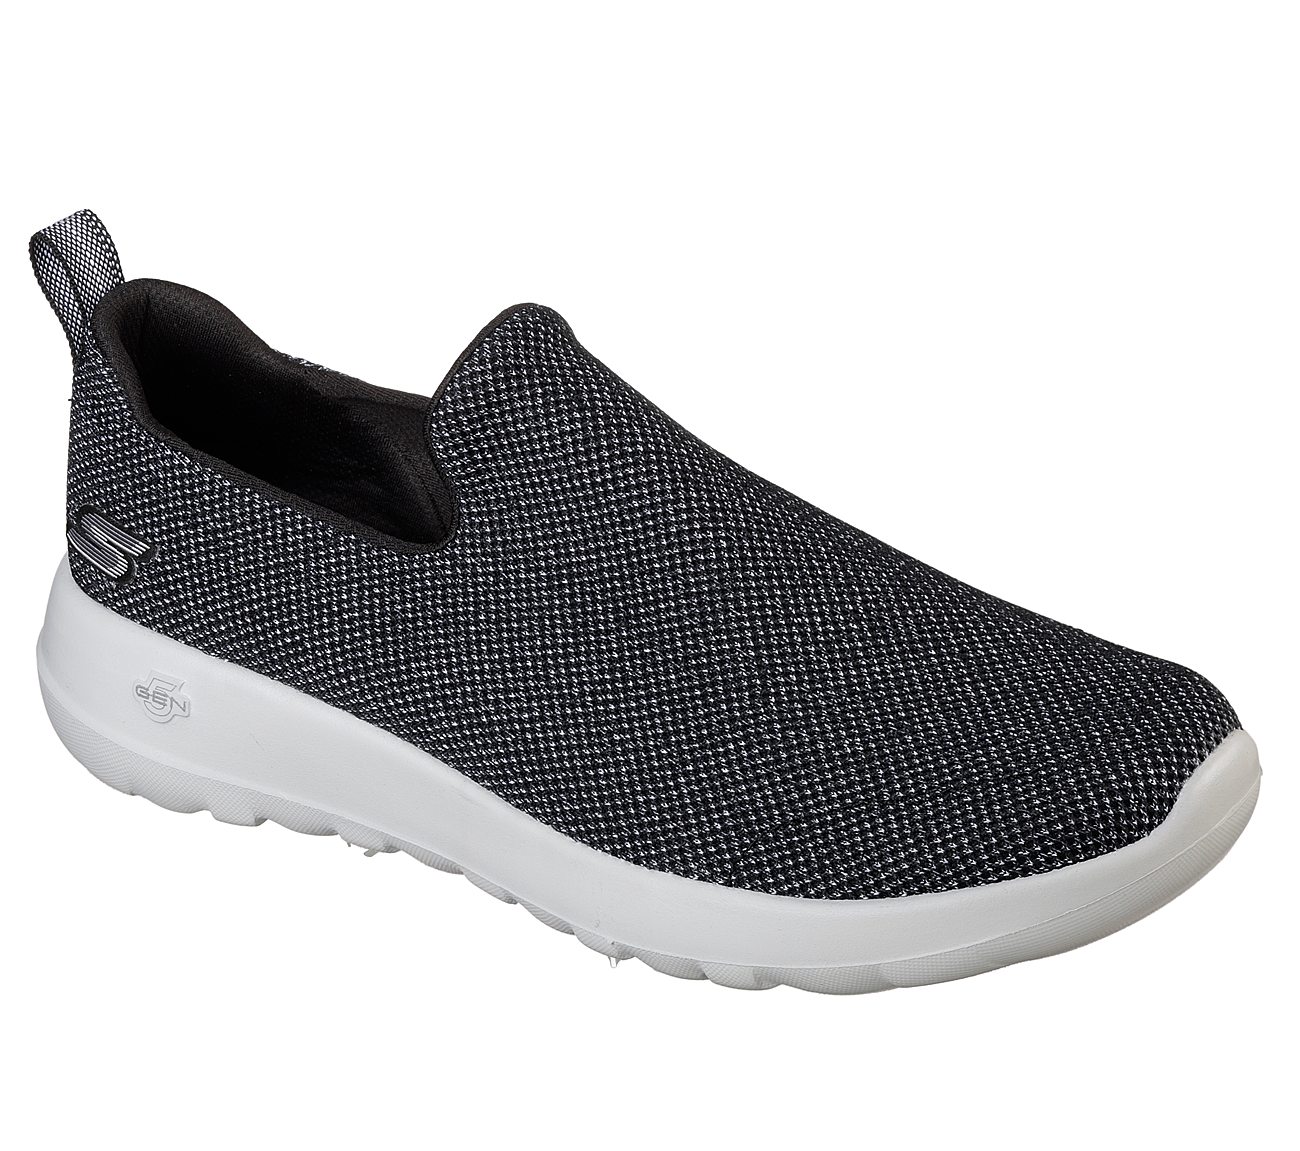 Skechers Black/Grey Go Walk Max Centric Mens Walking Shoes - Style ID ...